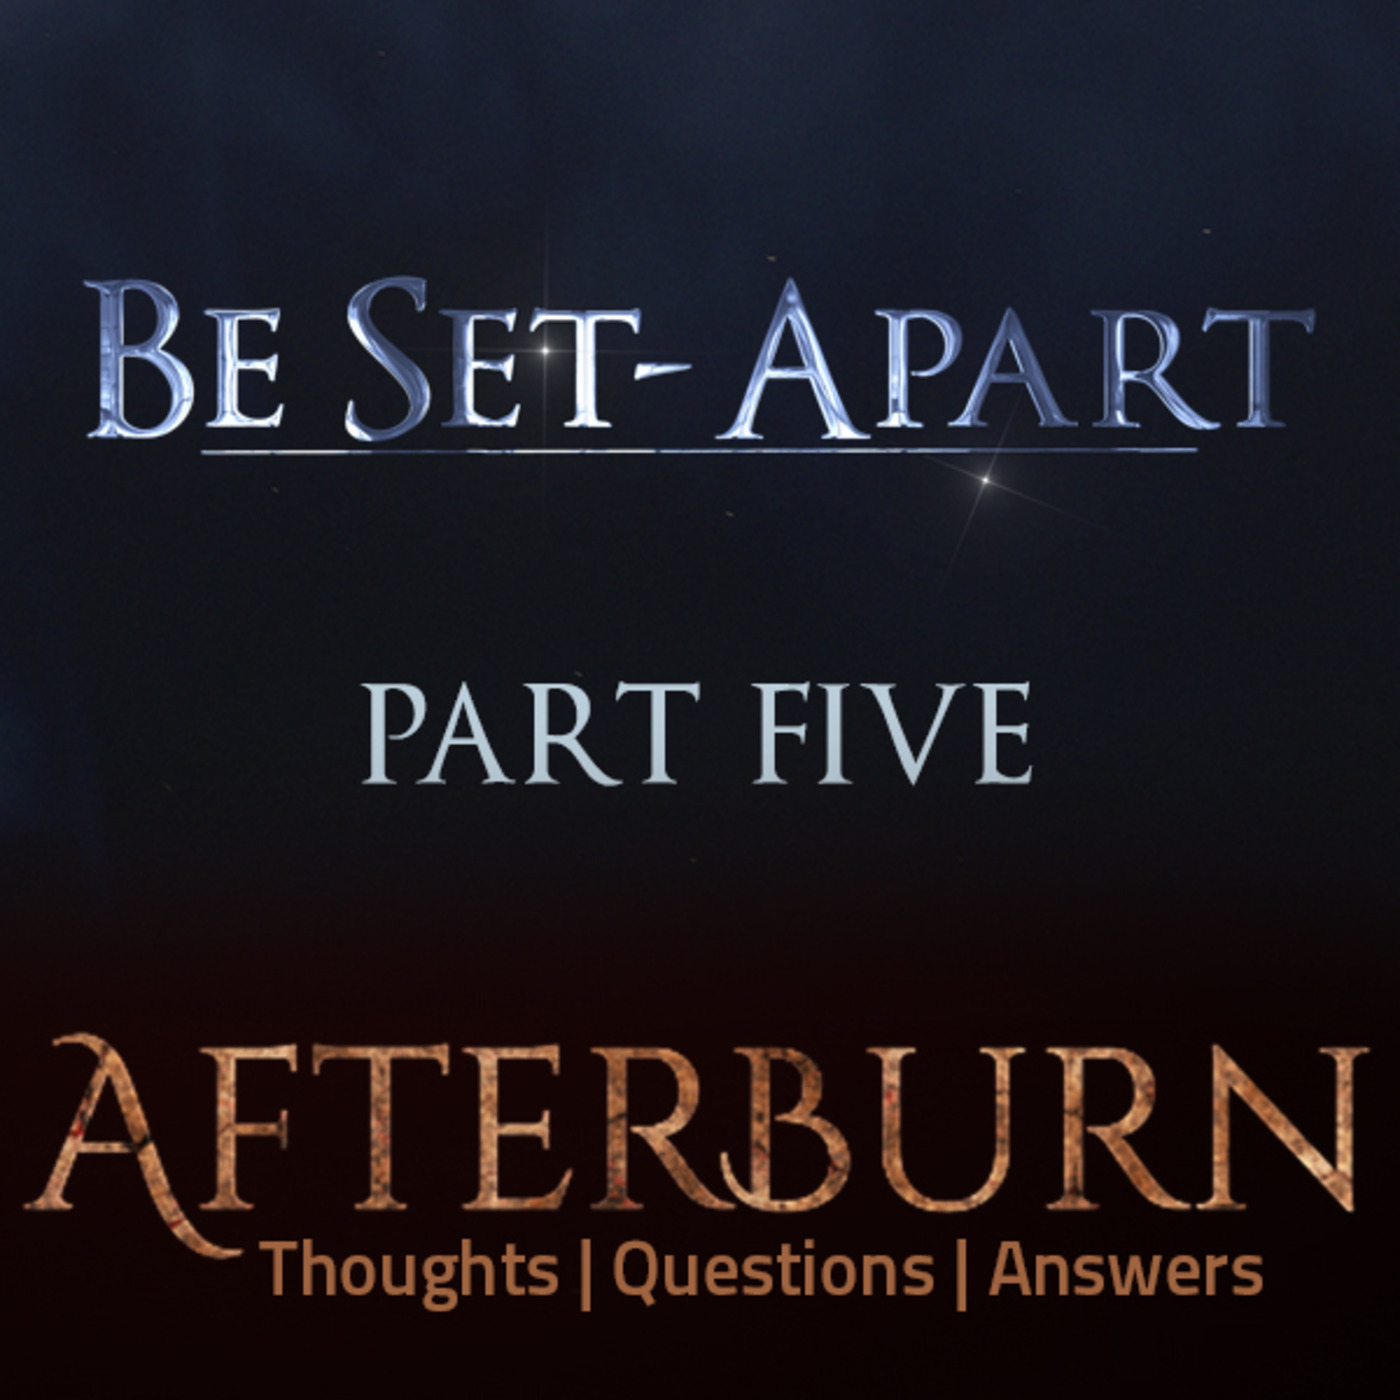 Episode 764: Afterburn | Thoughts, Q&A on Be Set-Apart | Part Five